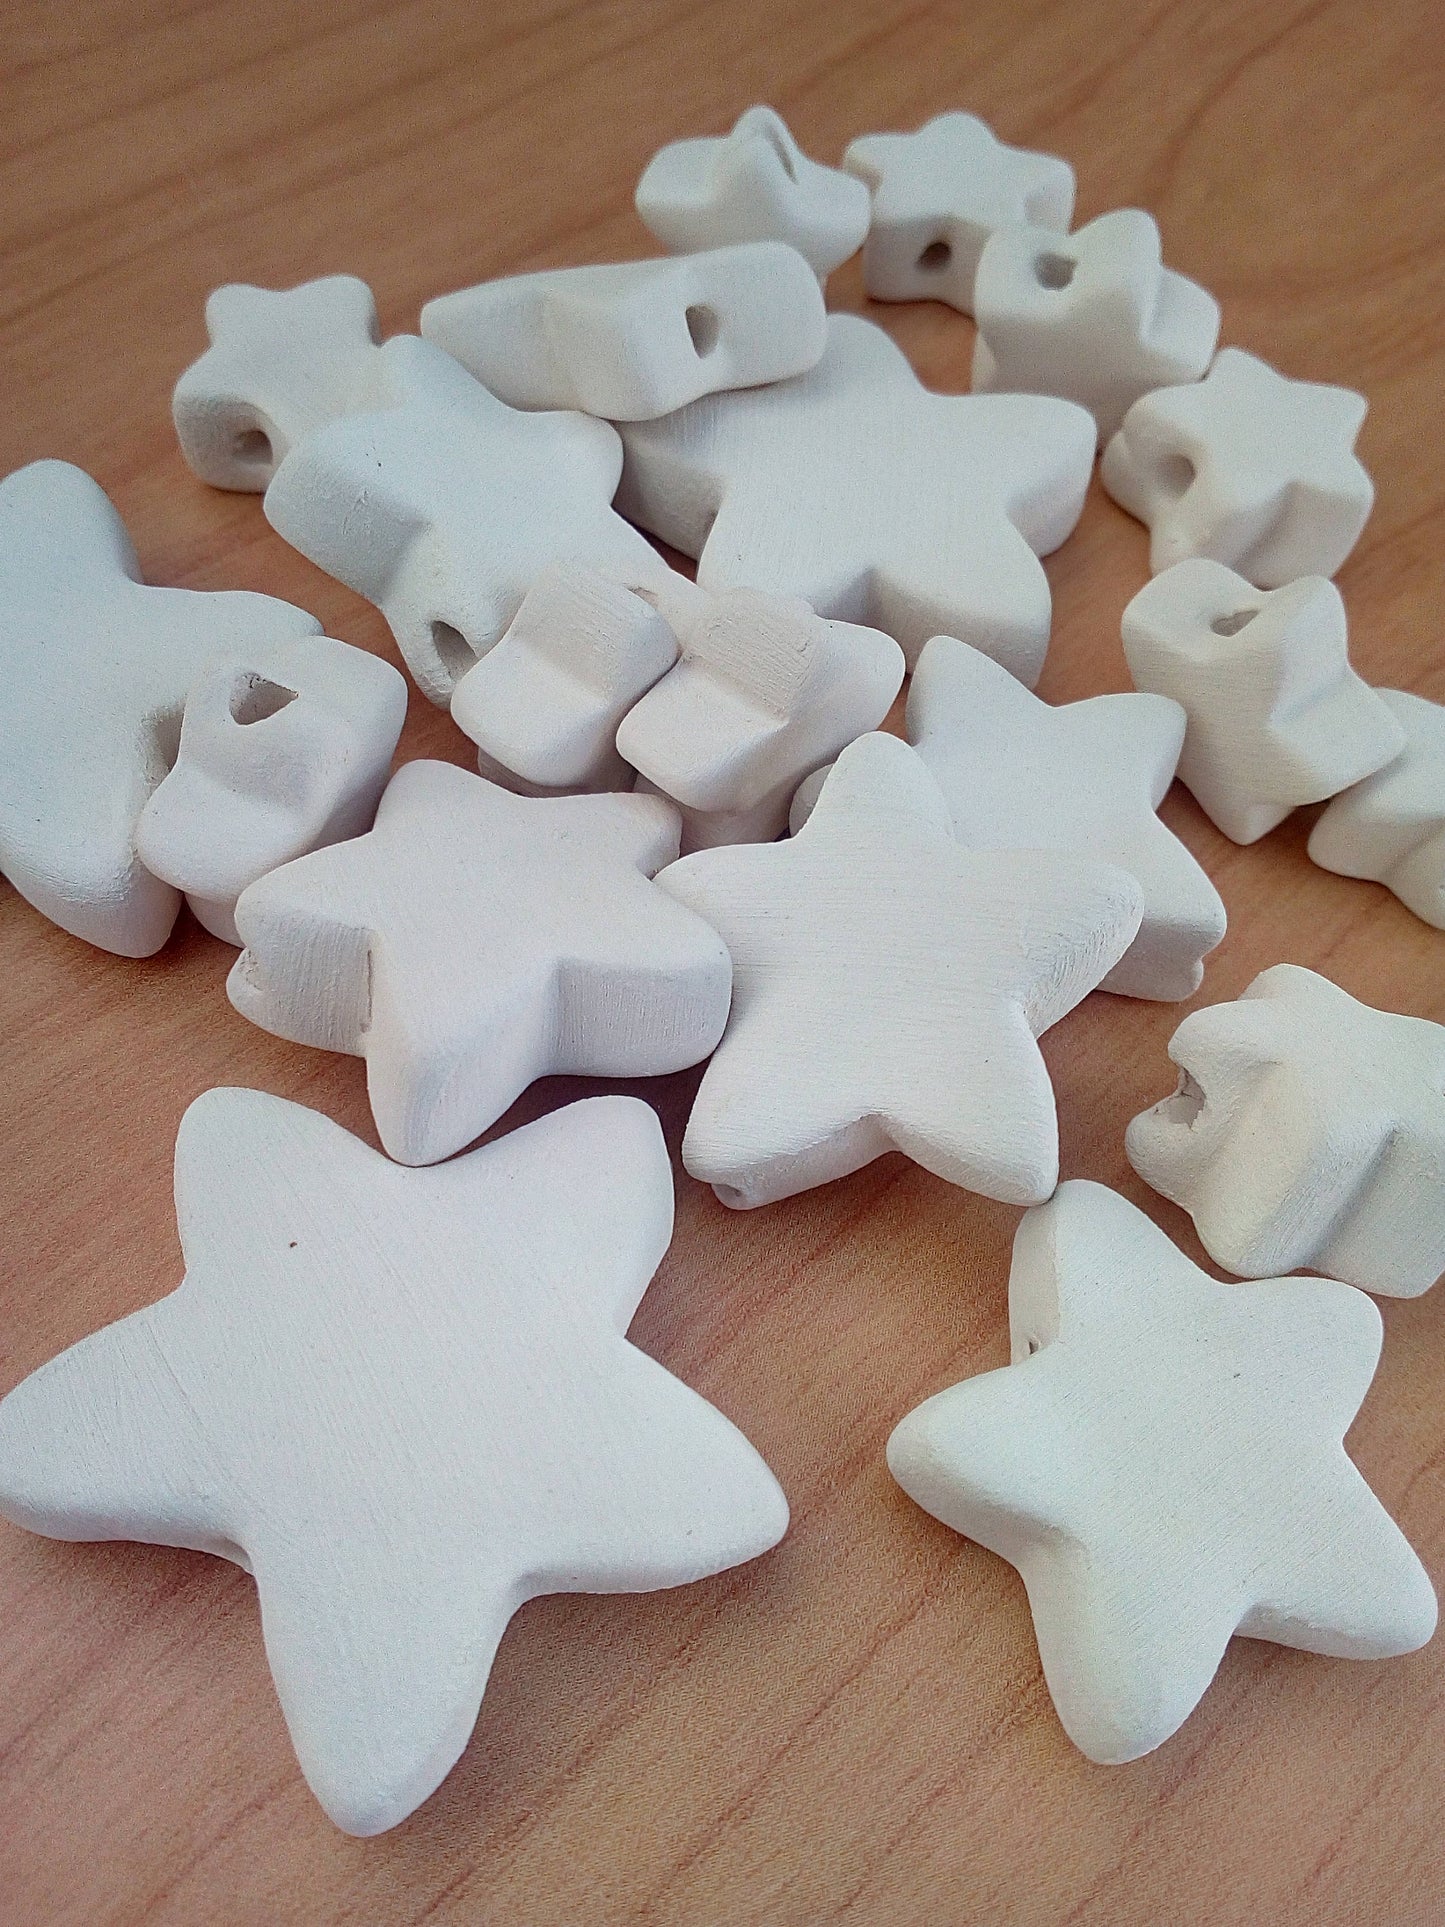 Handmade ceramic bisque beads set for jewelry making, Unfinished Star Beads blank ready to paint - Ceramica Ana Rafael